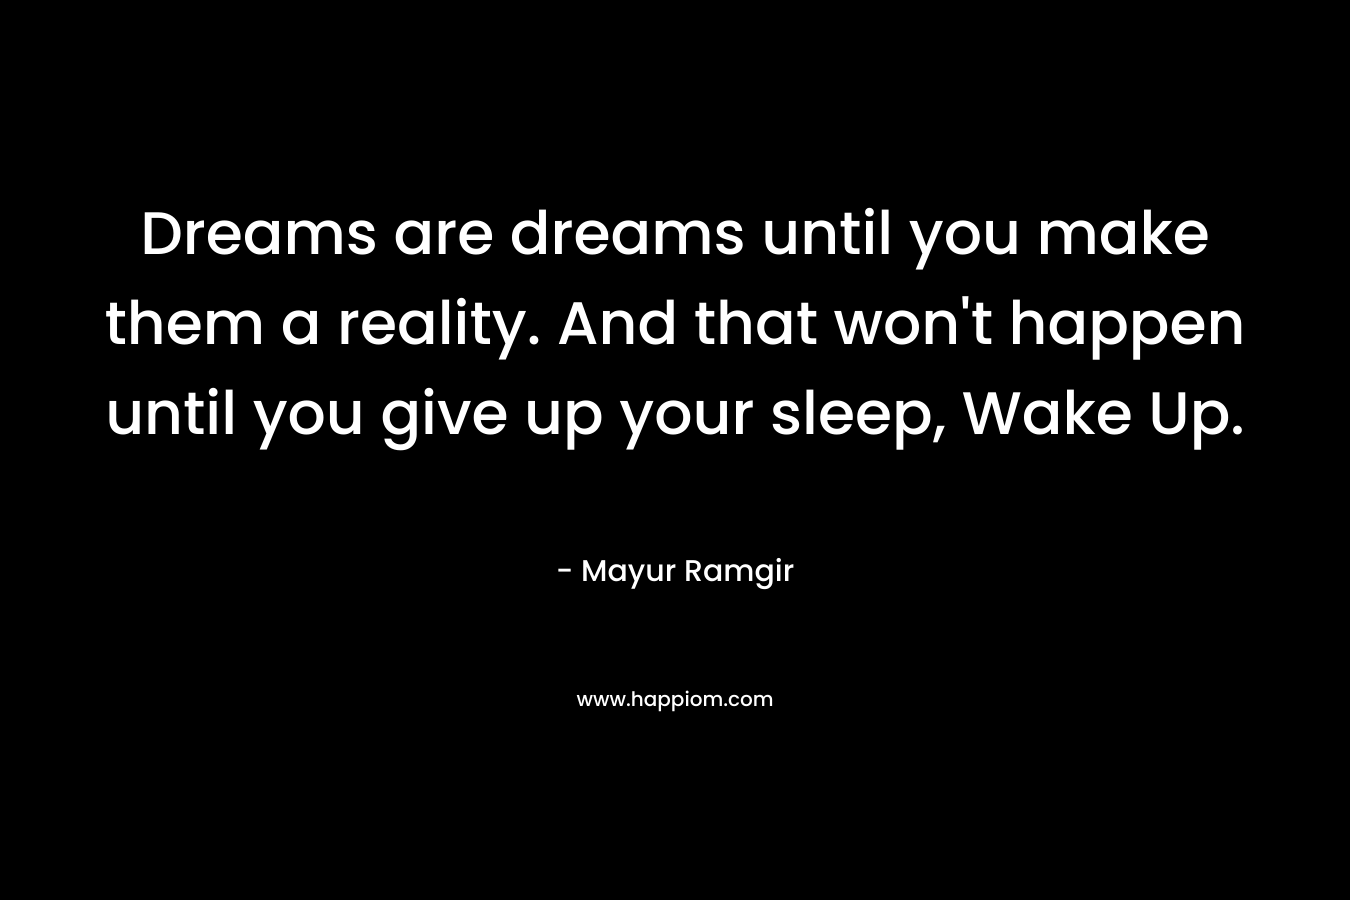 Dreams are dreams until you make them a reality. And that won't happen until you give up your sleep, Wake Up.